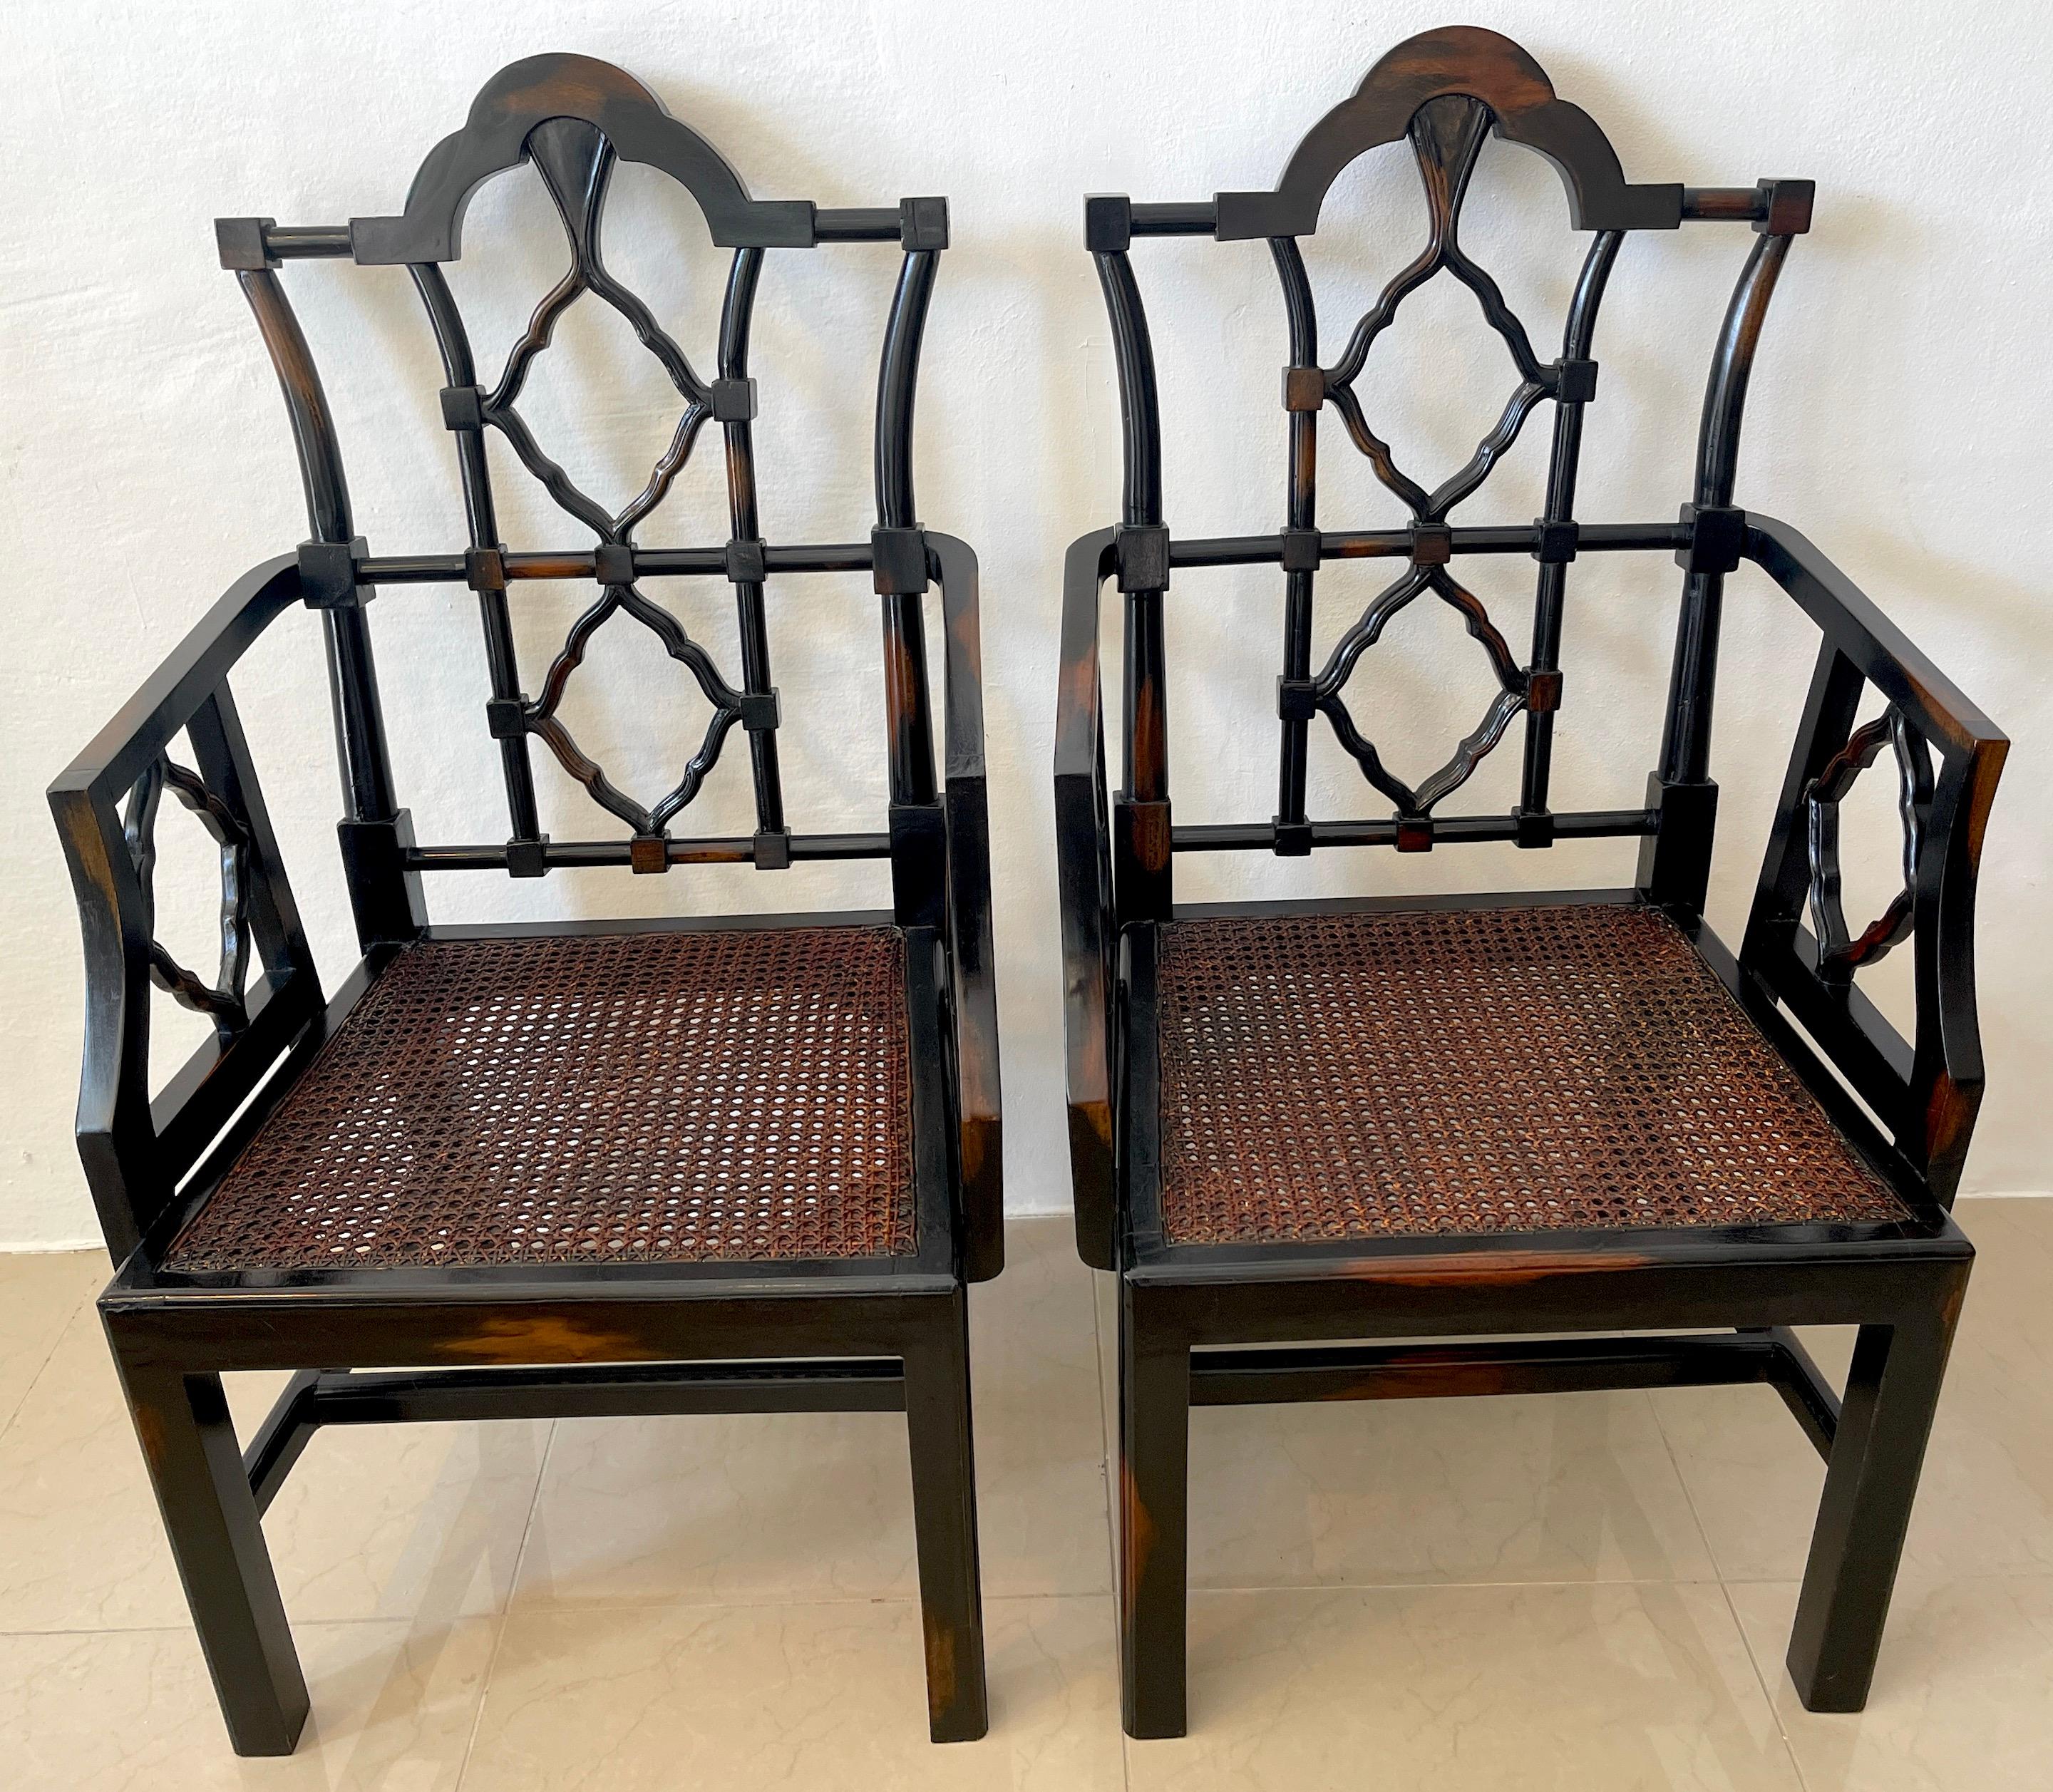 Pair of Georgian style Chinese chippendale arm chairs, Each one of generous proportions, with pagoda back rests, pierced diamond armrests, cane seat. Complete with a custom ebonized finish with intentional light spots, resembling cowhide. Raised on